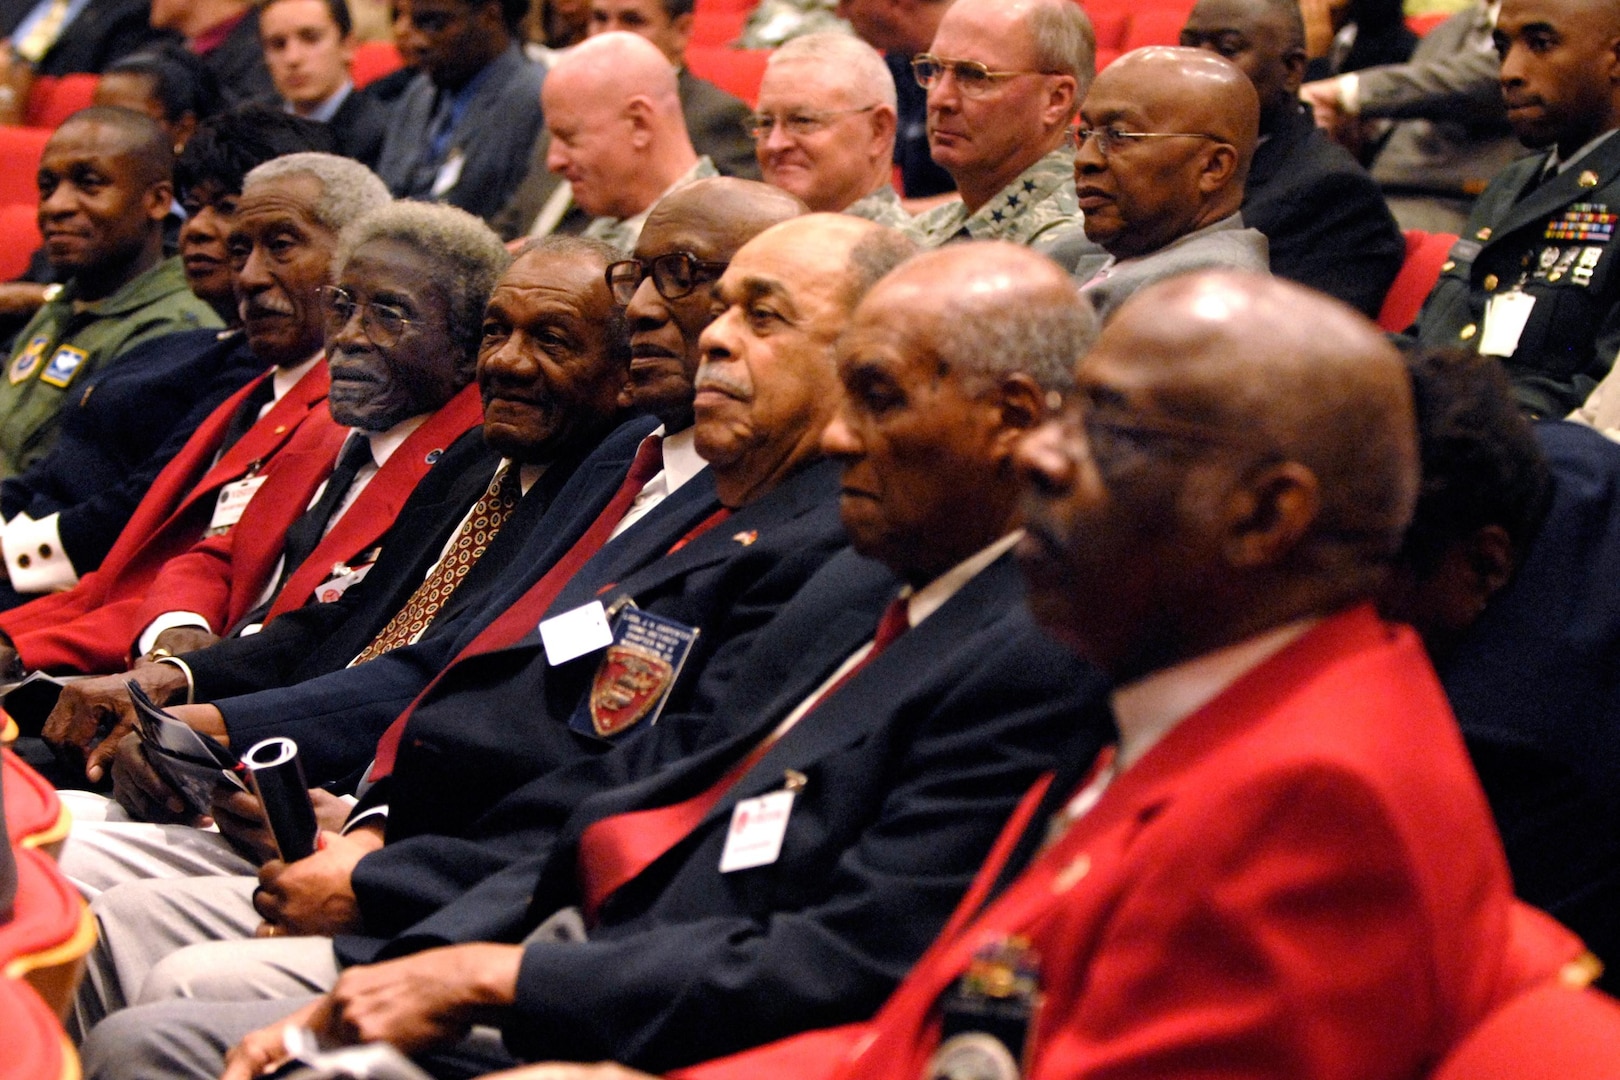 Three Tuskegee Airmen members wearing red jackets, sit among the audience during a ceremony, August 6, 2008 inside the Pentagon Auditorium, hosted by Secretary of Defense Robert M. Gates, not shown, honoring the 60th Anniversary commemorating the signing of Executive Orders 9980 and 9981. The orders were signed in 1948 to desegregrate the armed forces and the federal civil service.